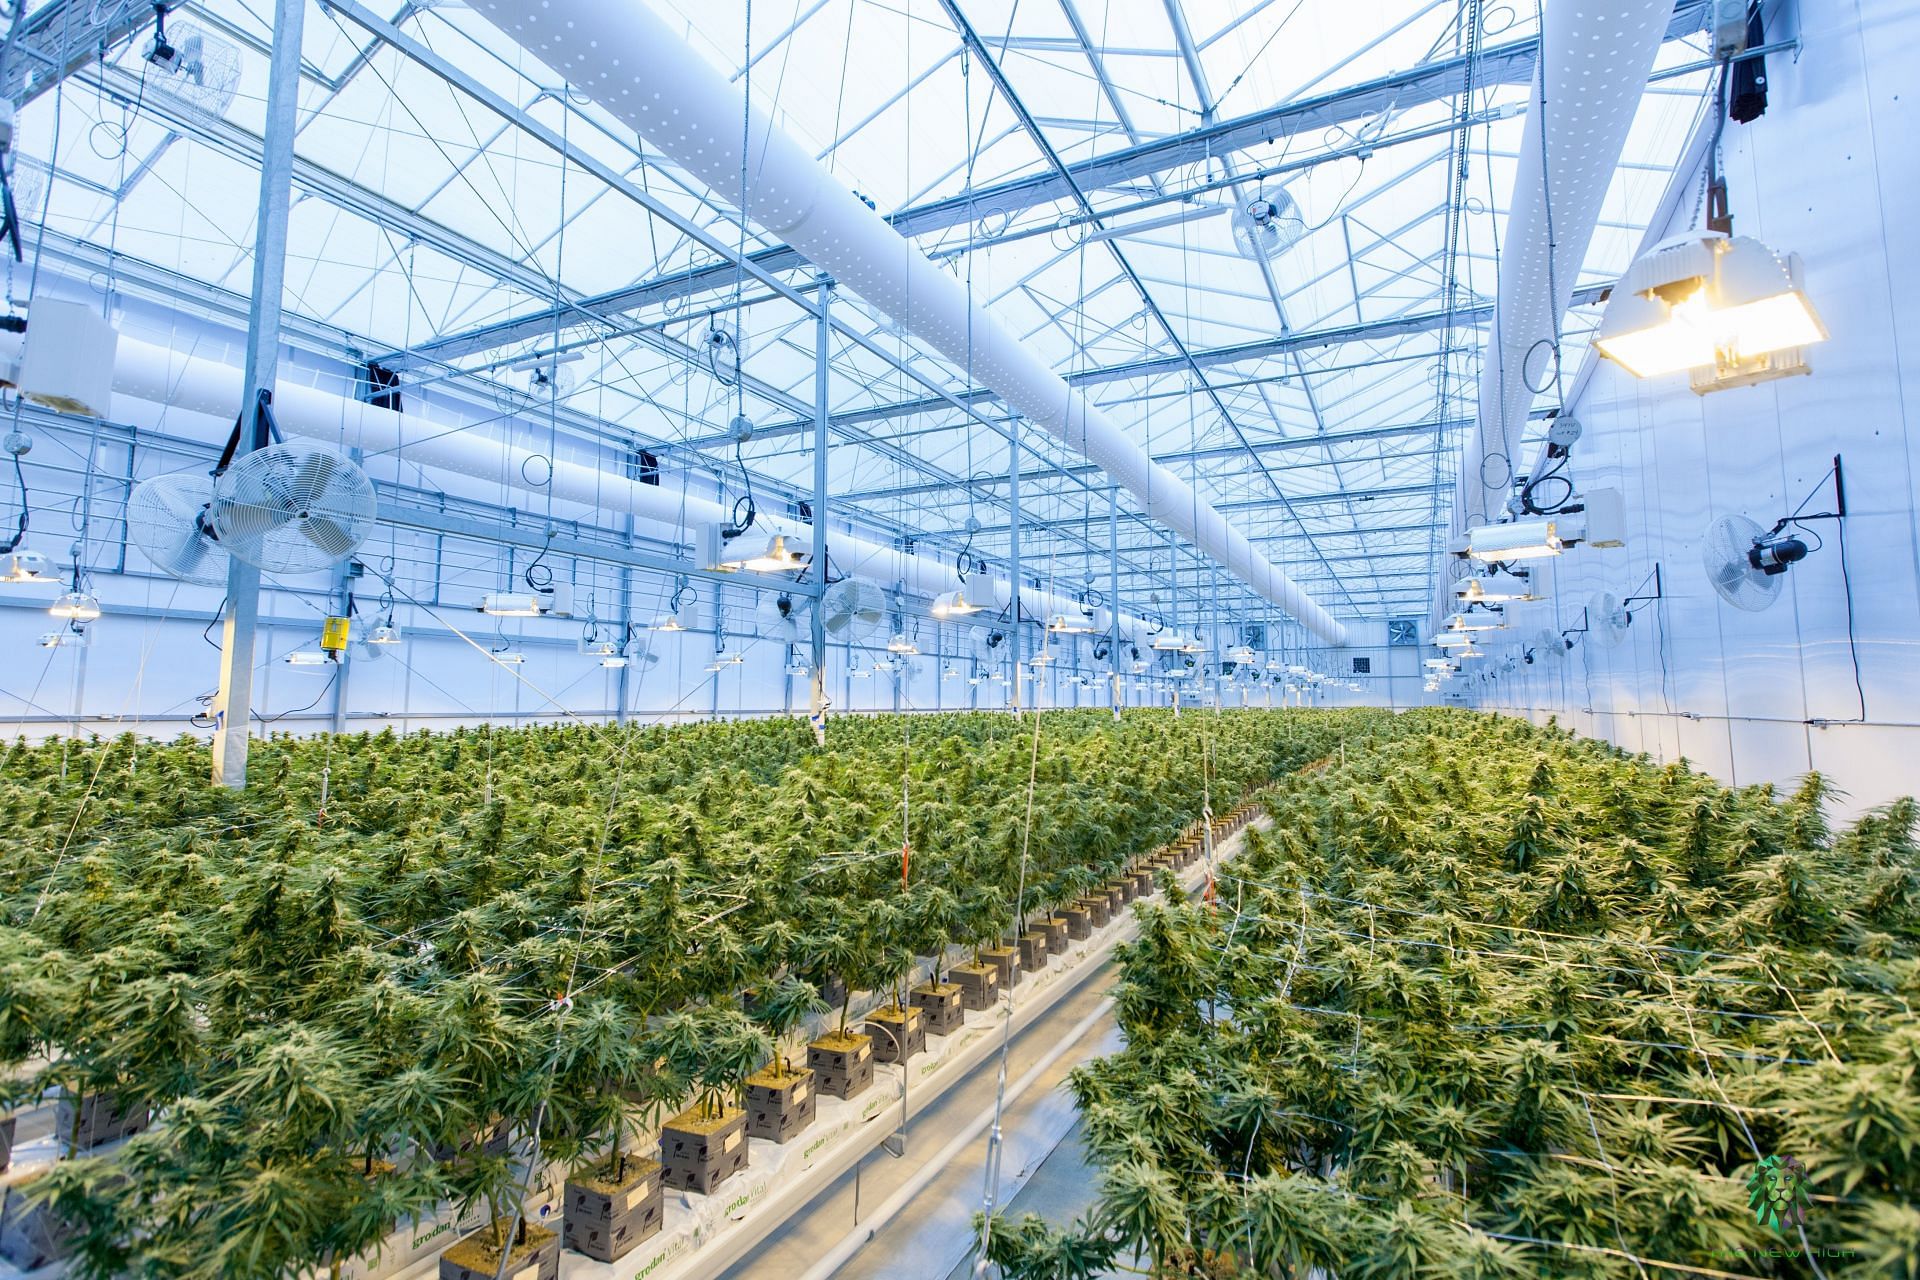 Commercial cannabis is produced in large-scale farms. (Image via Unsplash/Richard T)